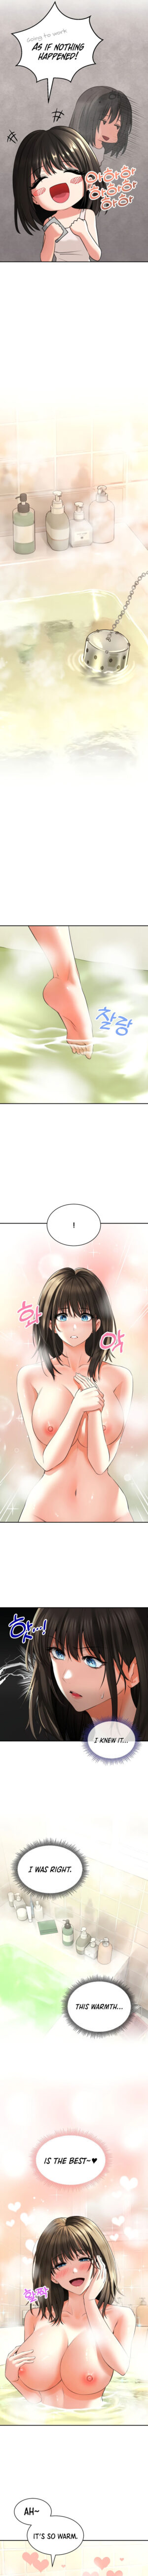 [Lee Juwon] Herbal Love Story (1-17) [English] [Omega Scans] [Ongoing]